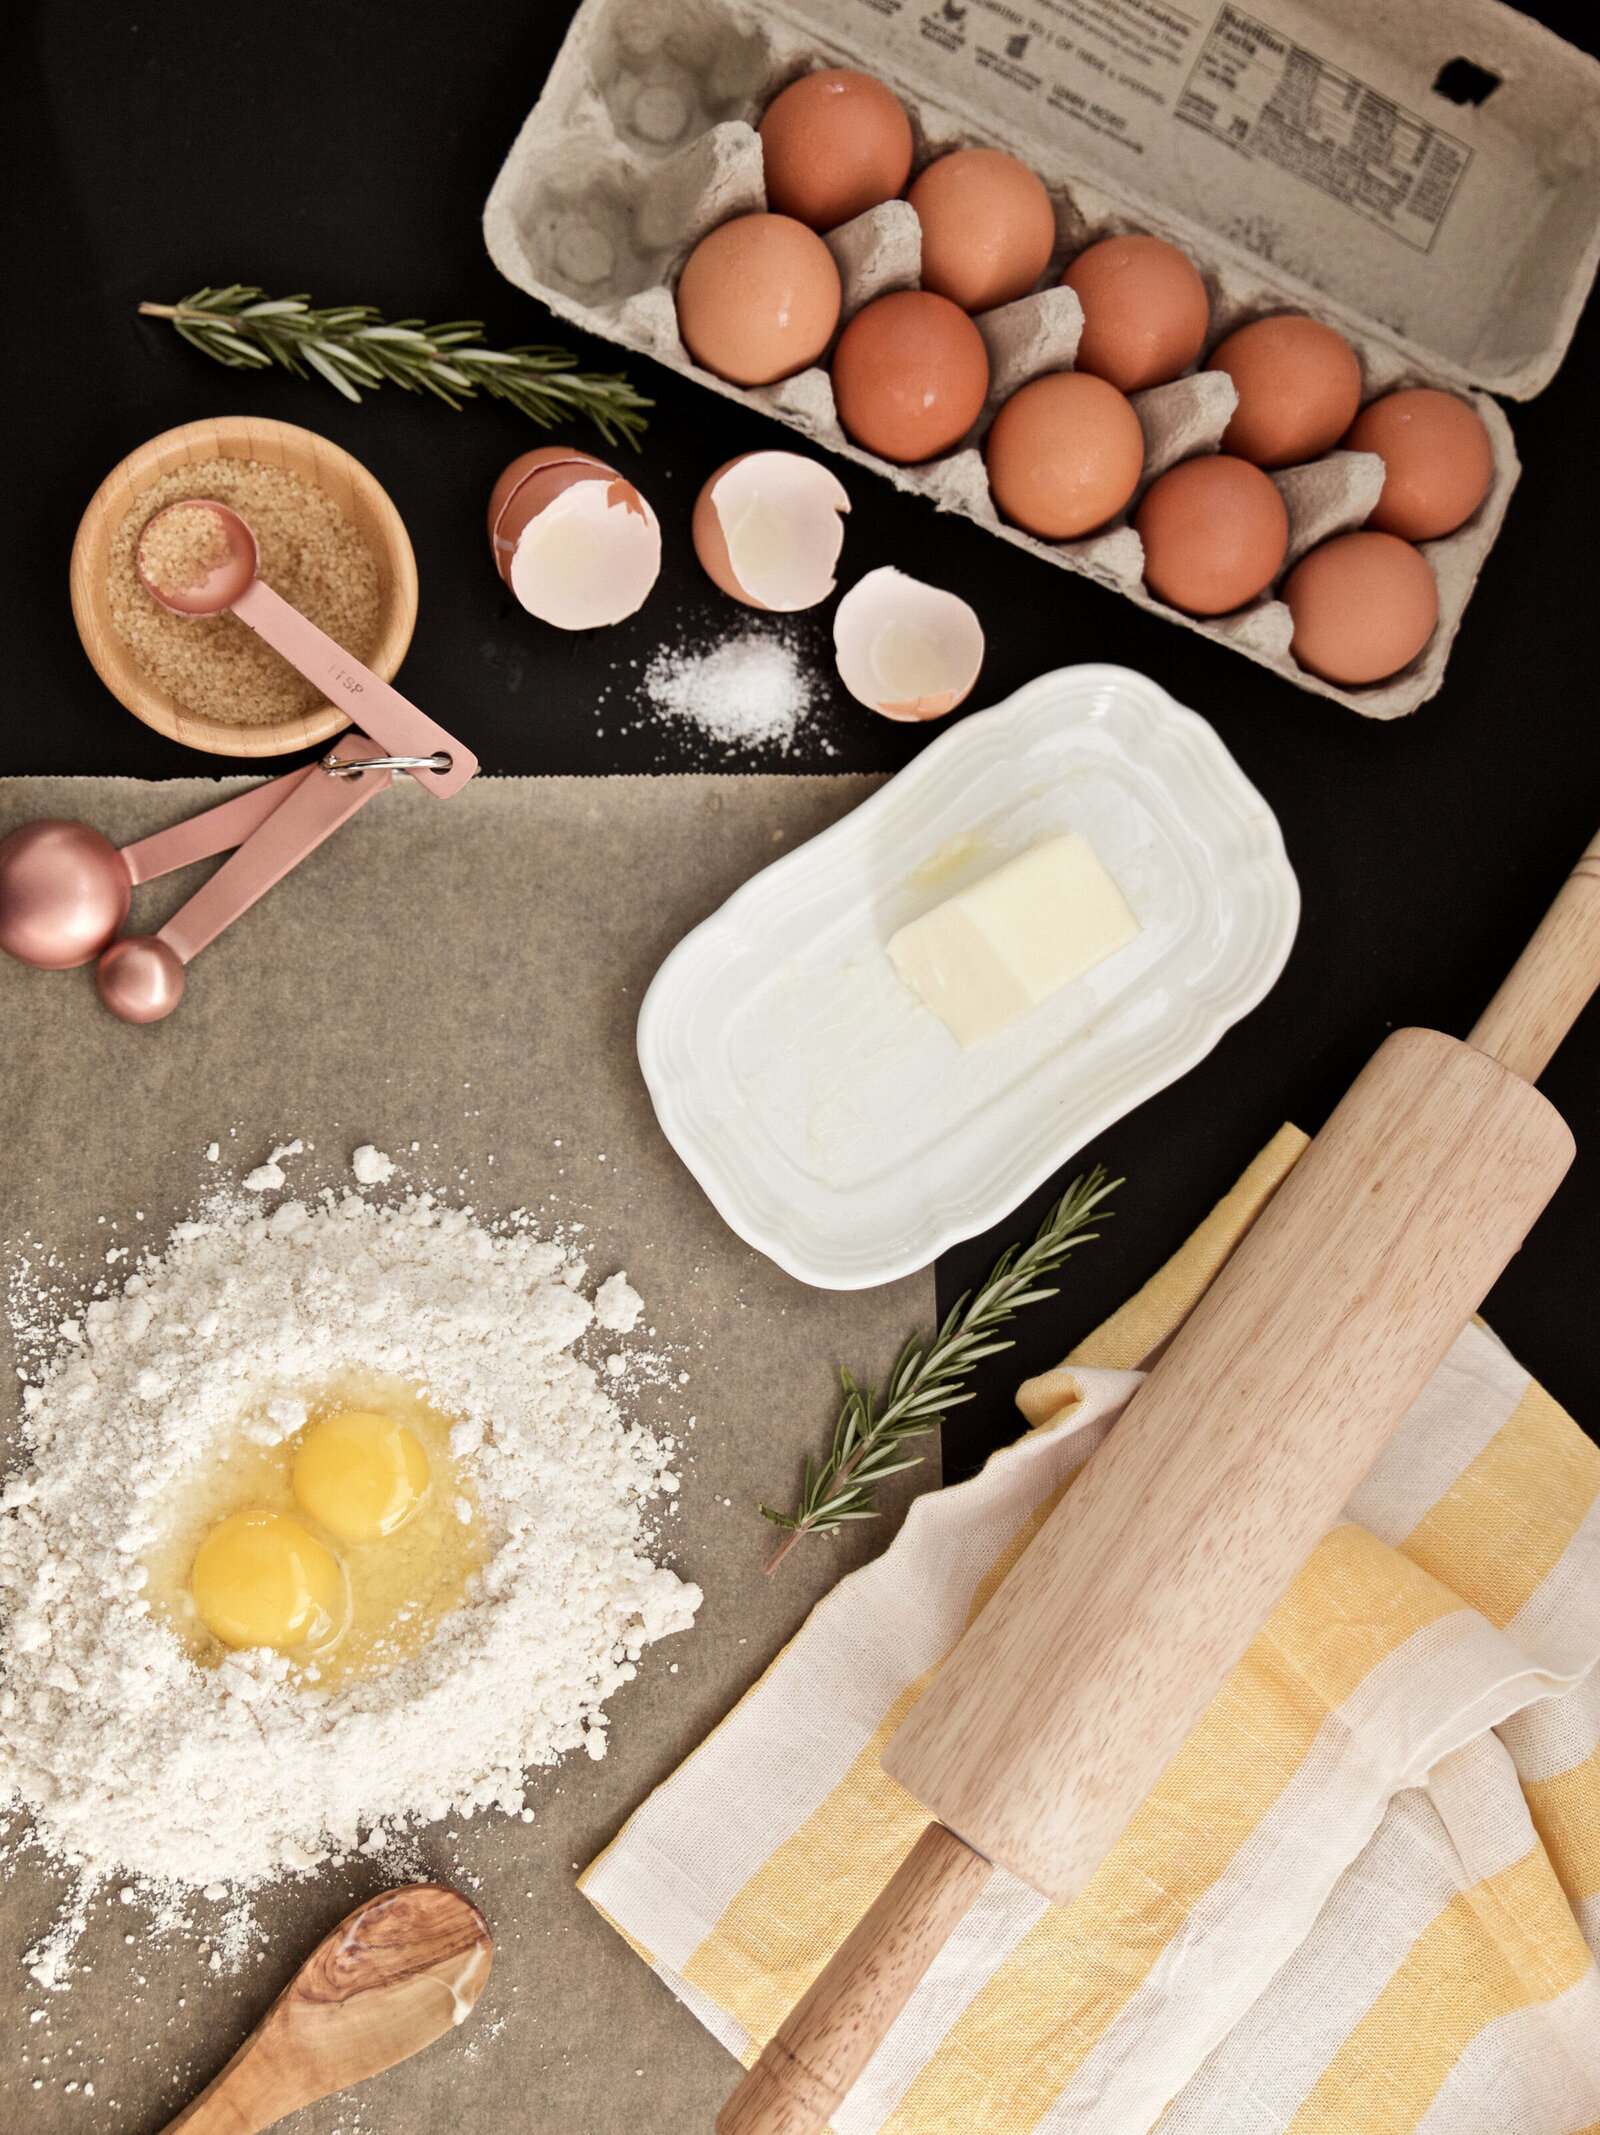 San Diego food photographer and stylist making pasta flat lay with eggs, flour, rolling pin